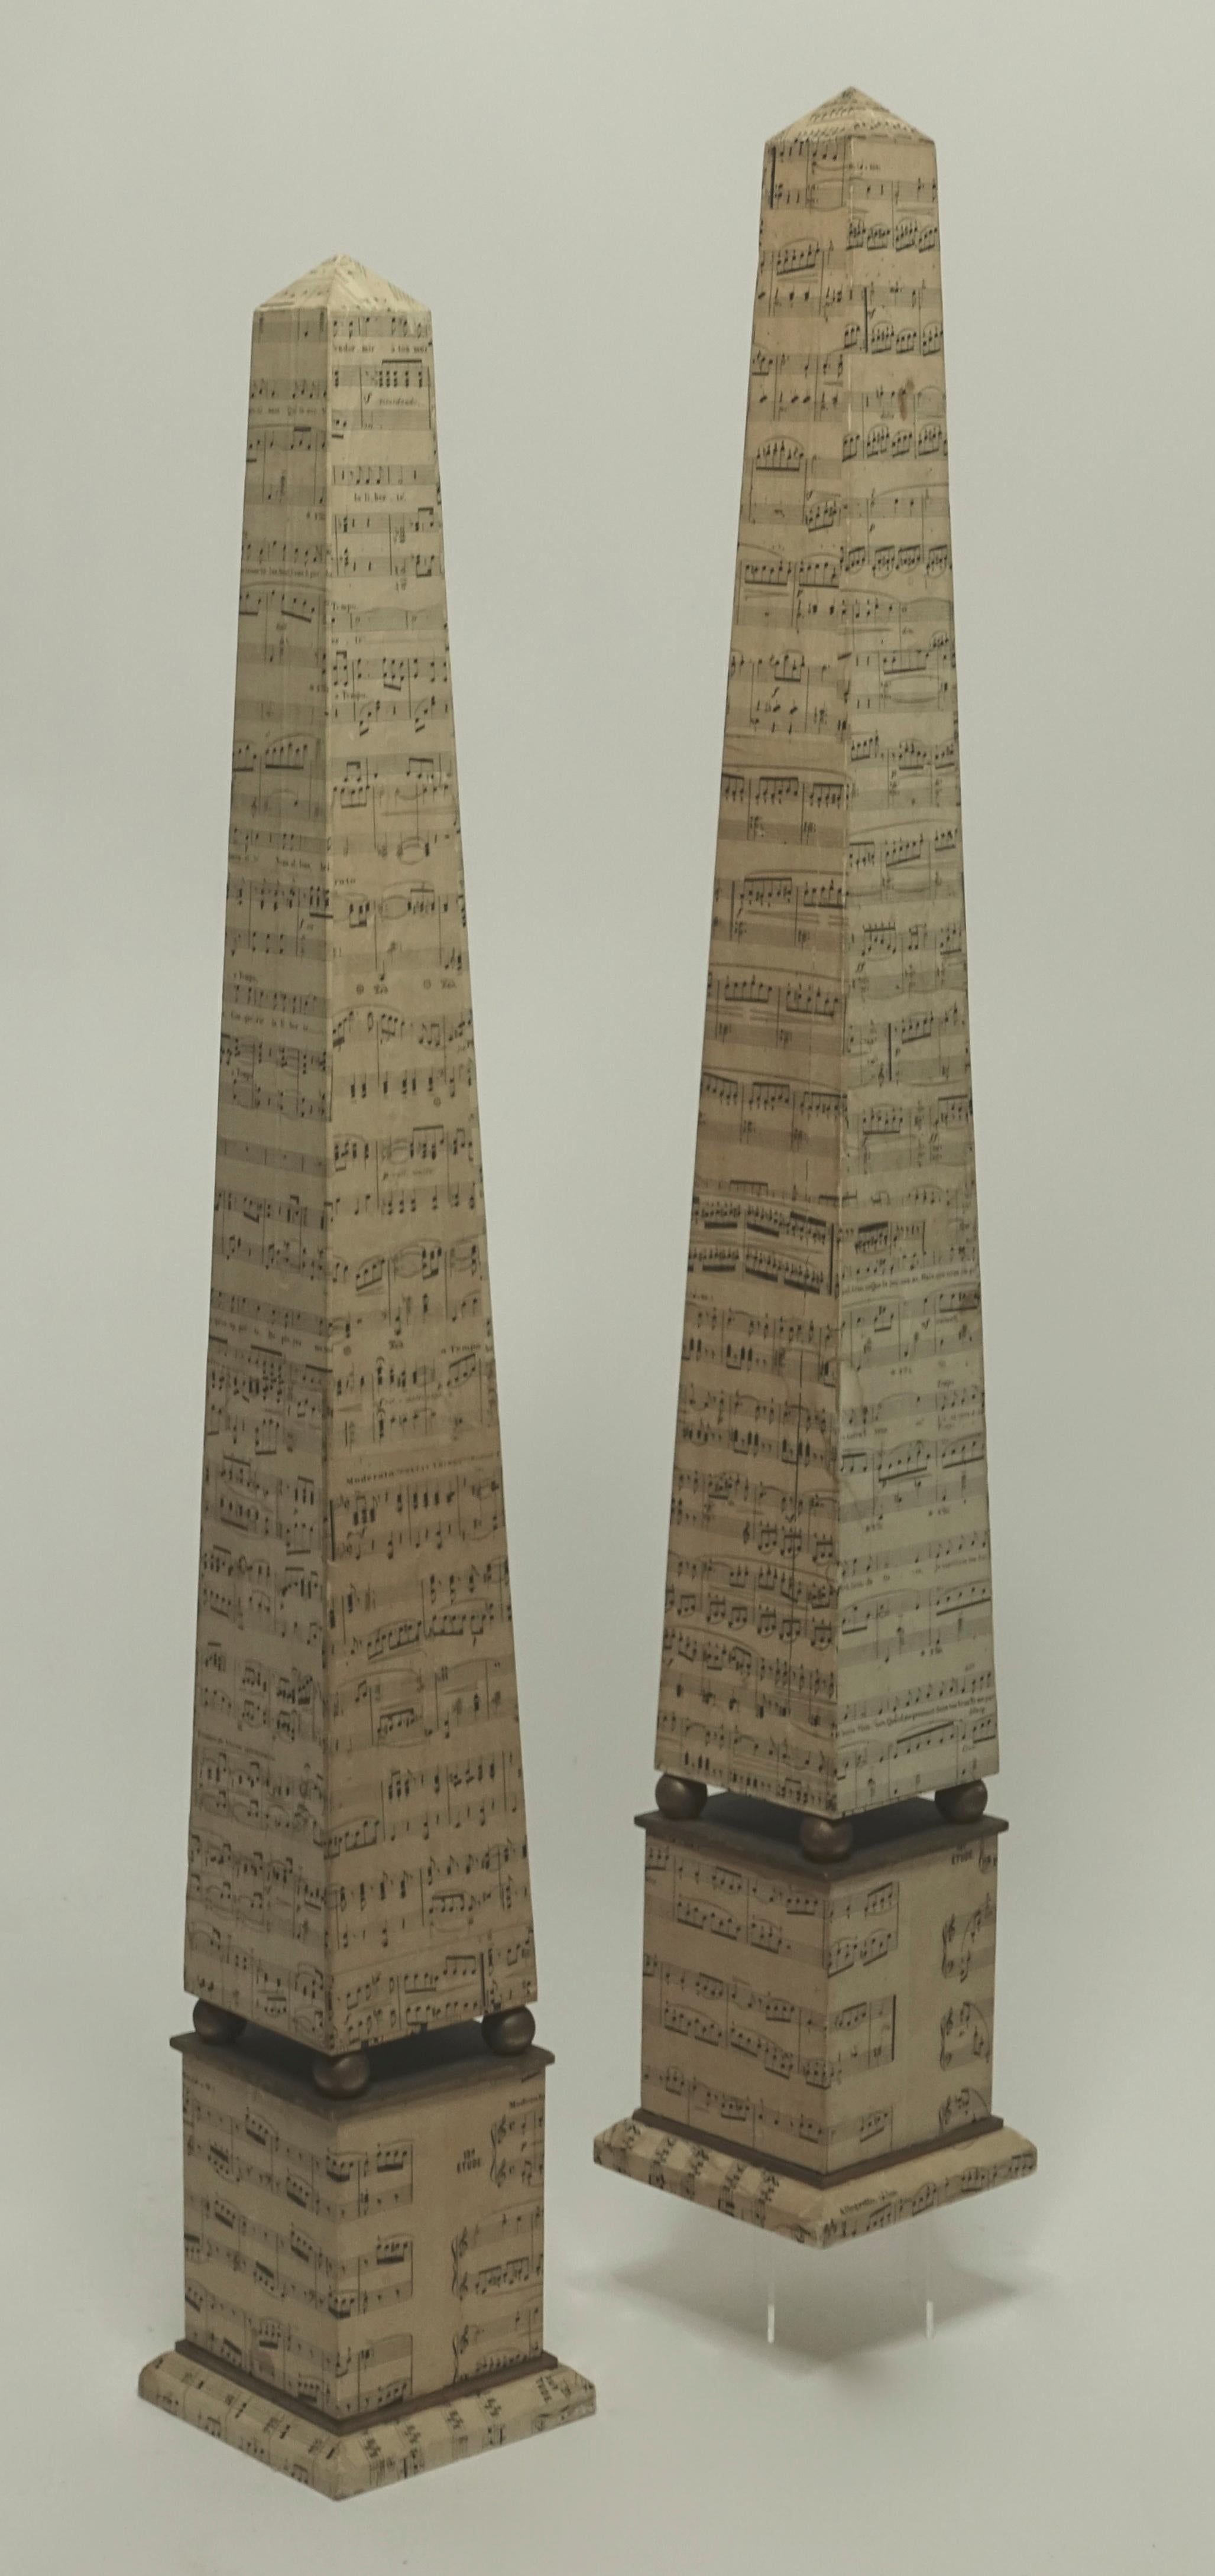 Neoclassical Monumental Pair of Italian Obelisks Covered in 19th Century Sheet Music For Sale